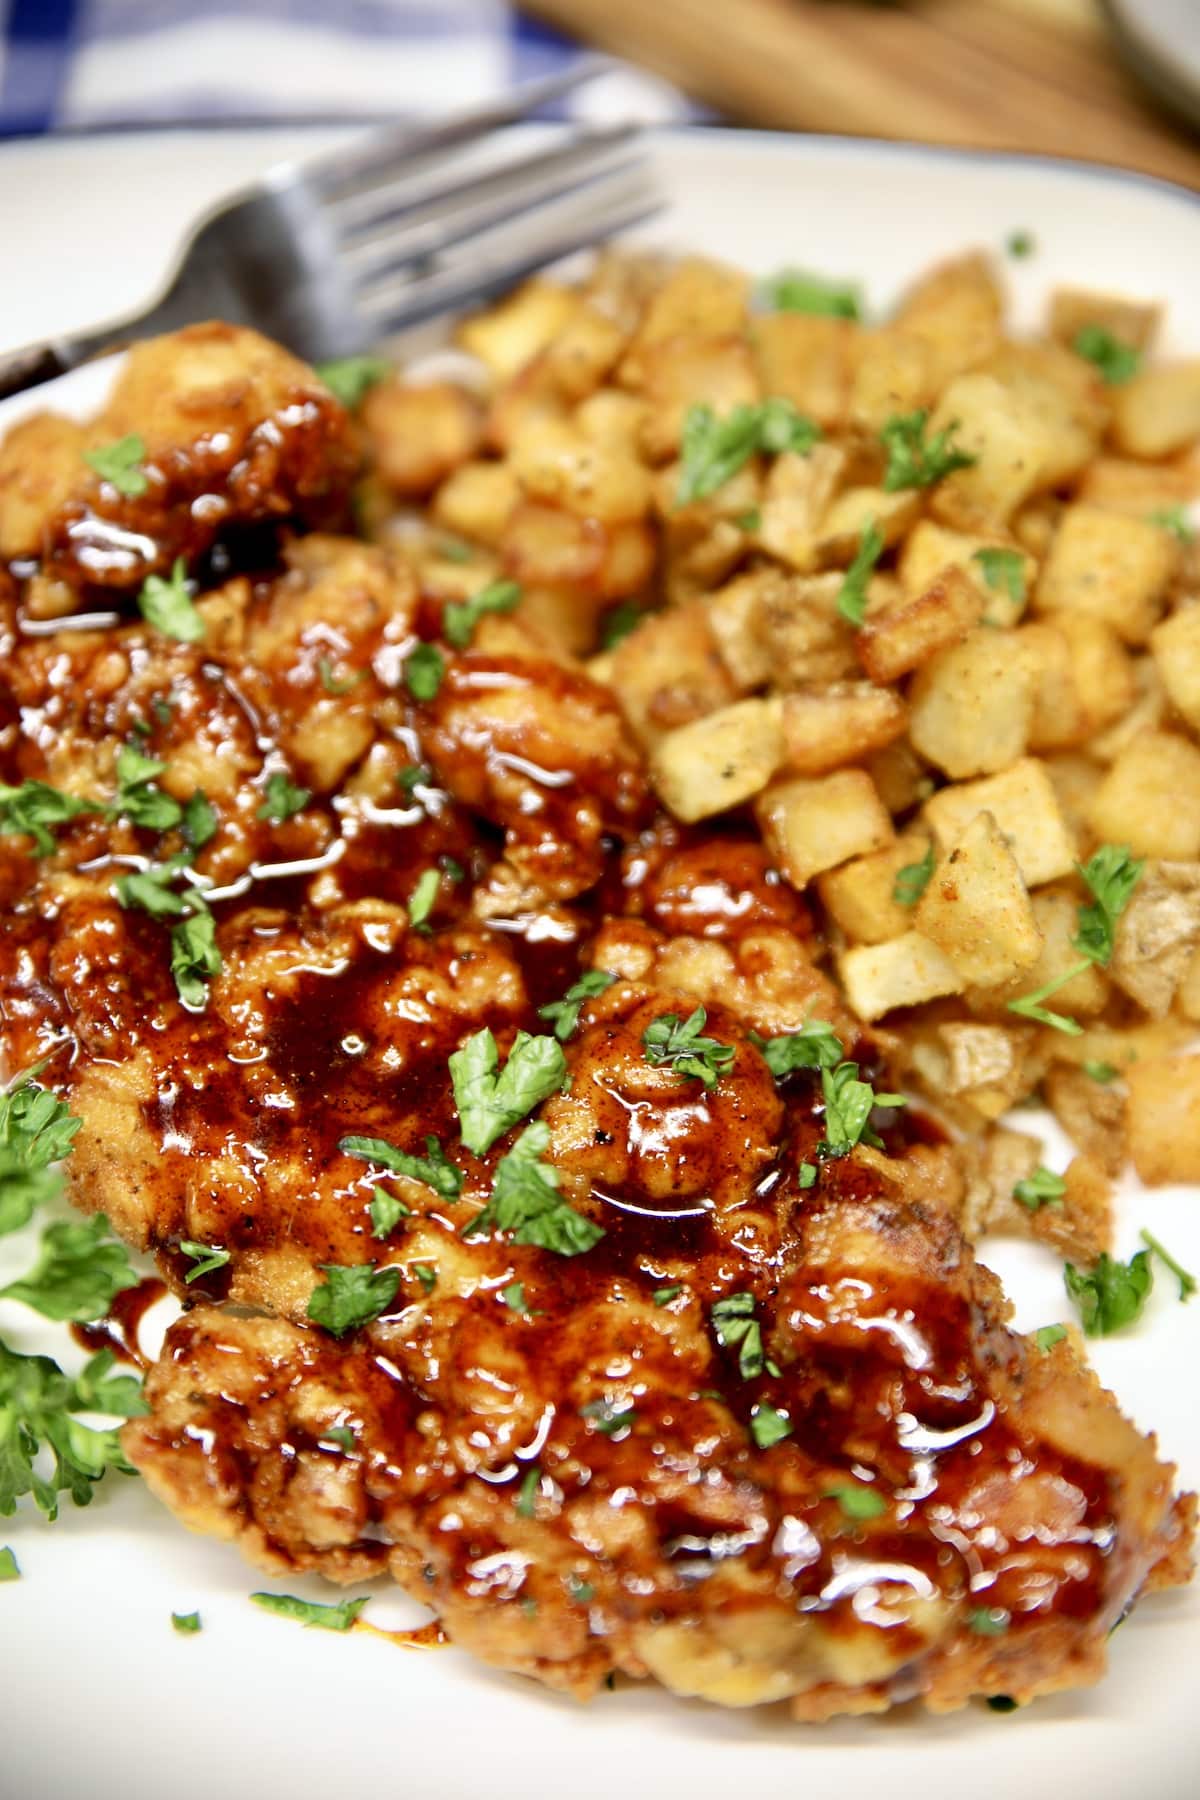 Chipotle honey fried chicken with potatoes.